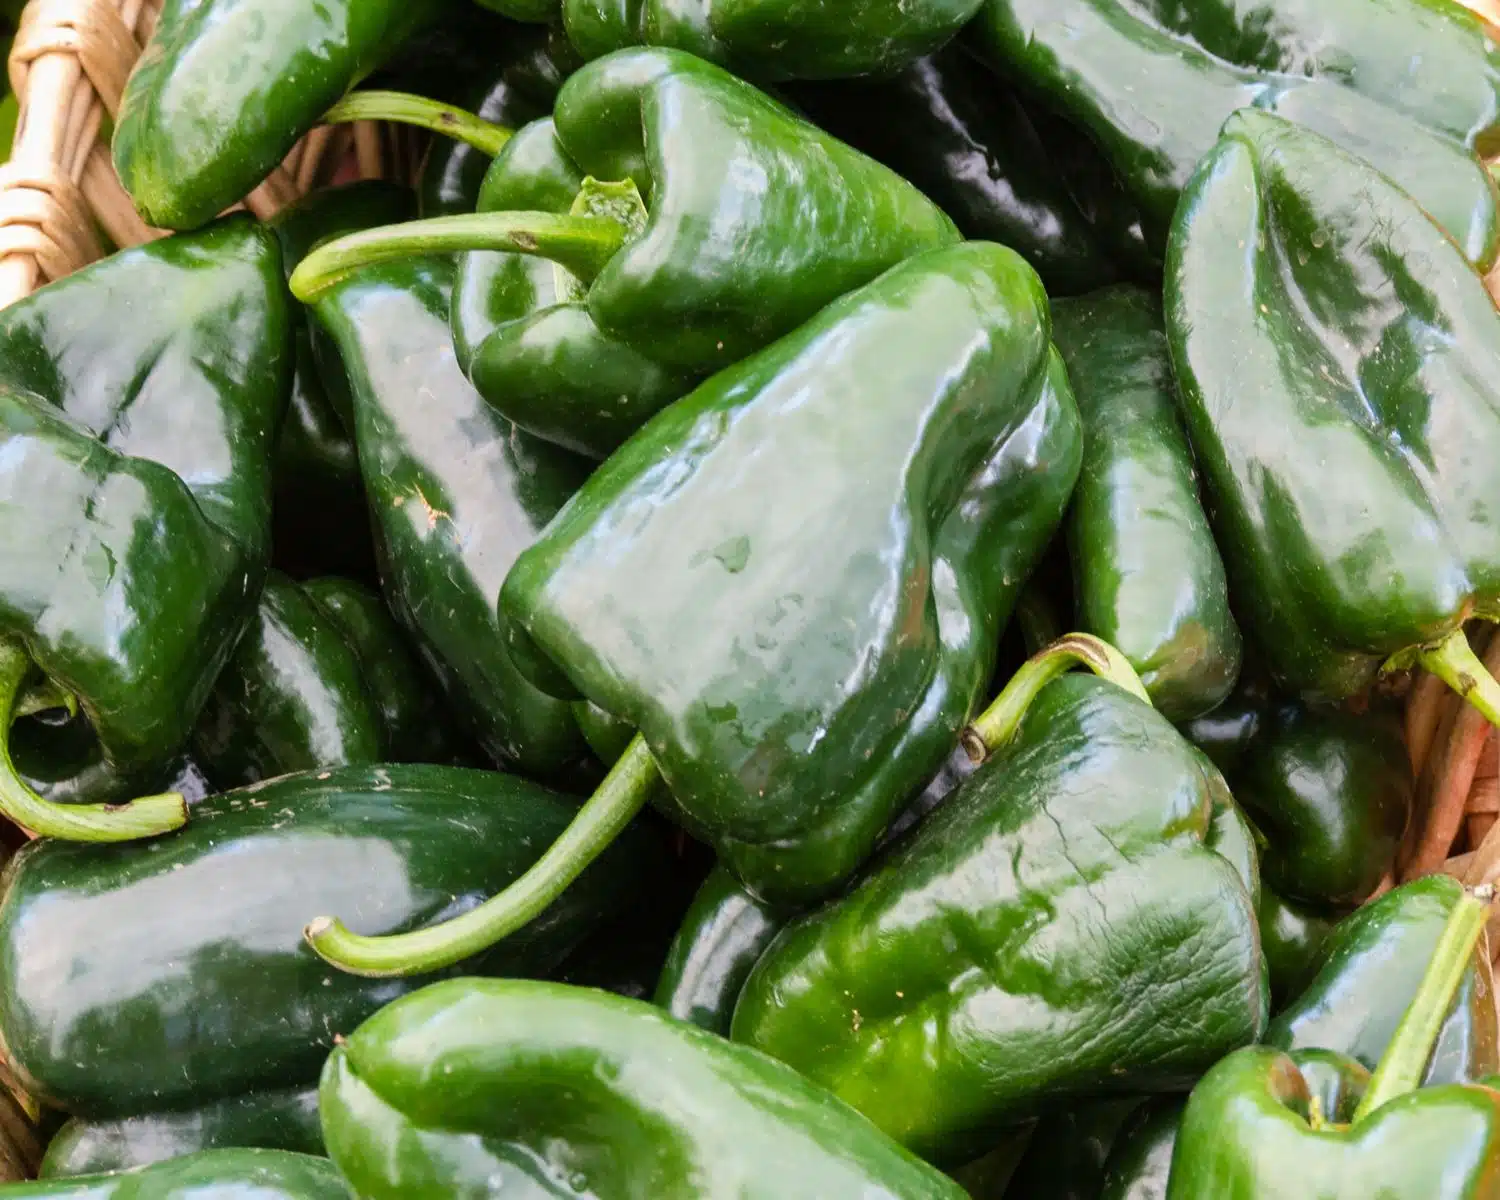 Looking down on a bunch of green poblano peppers.